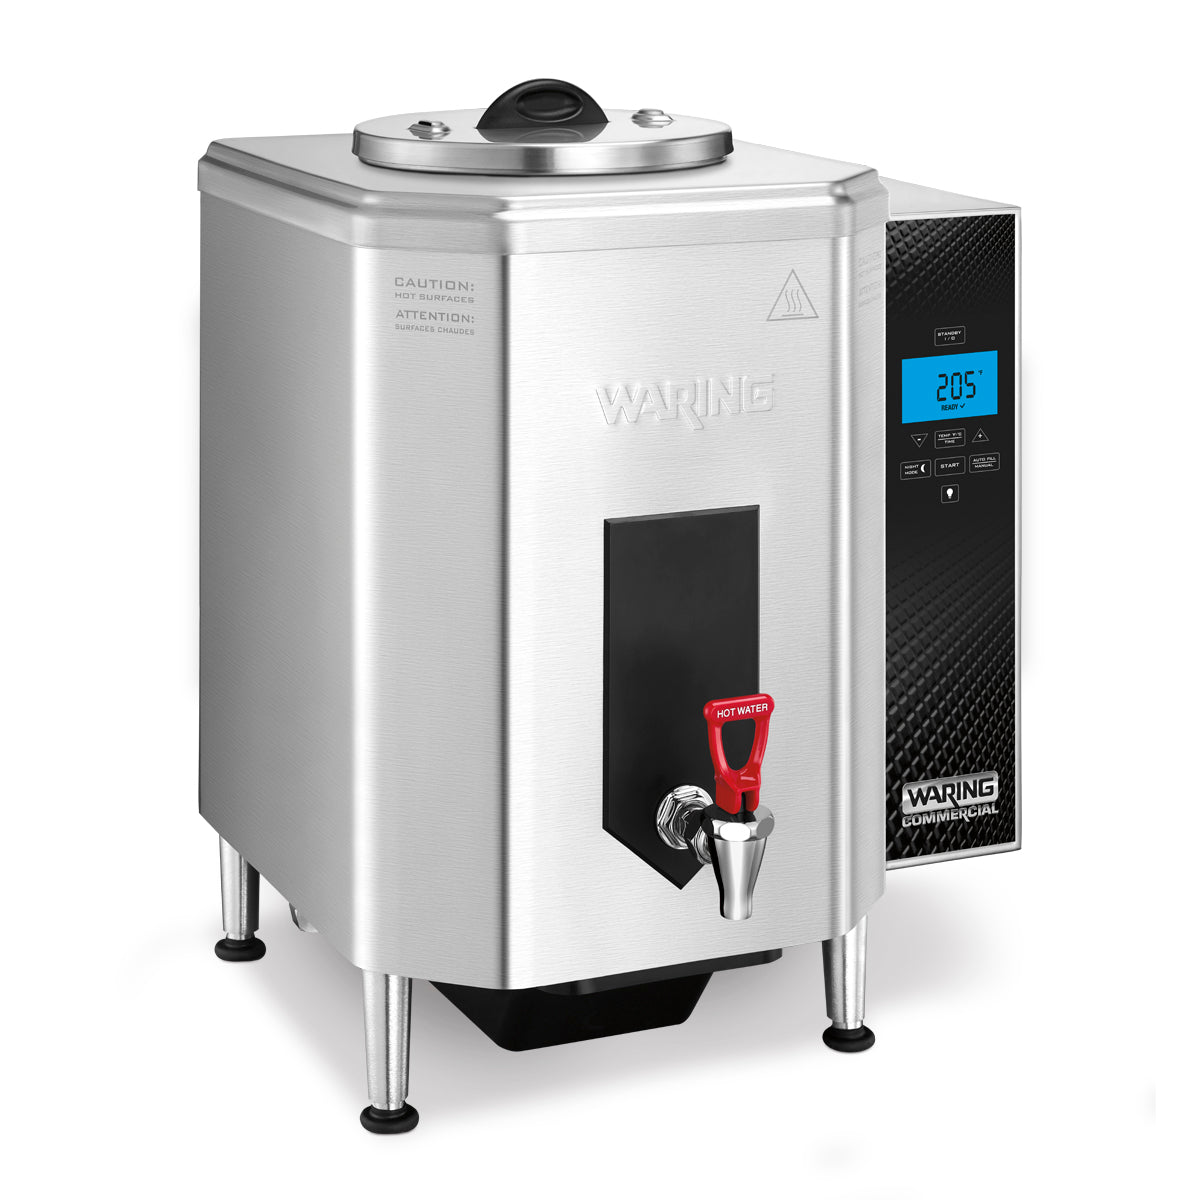 WWB10G 10-Gallon Hot Water Dispenser by Waring Commercial